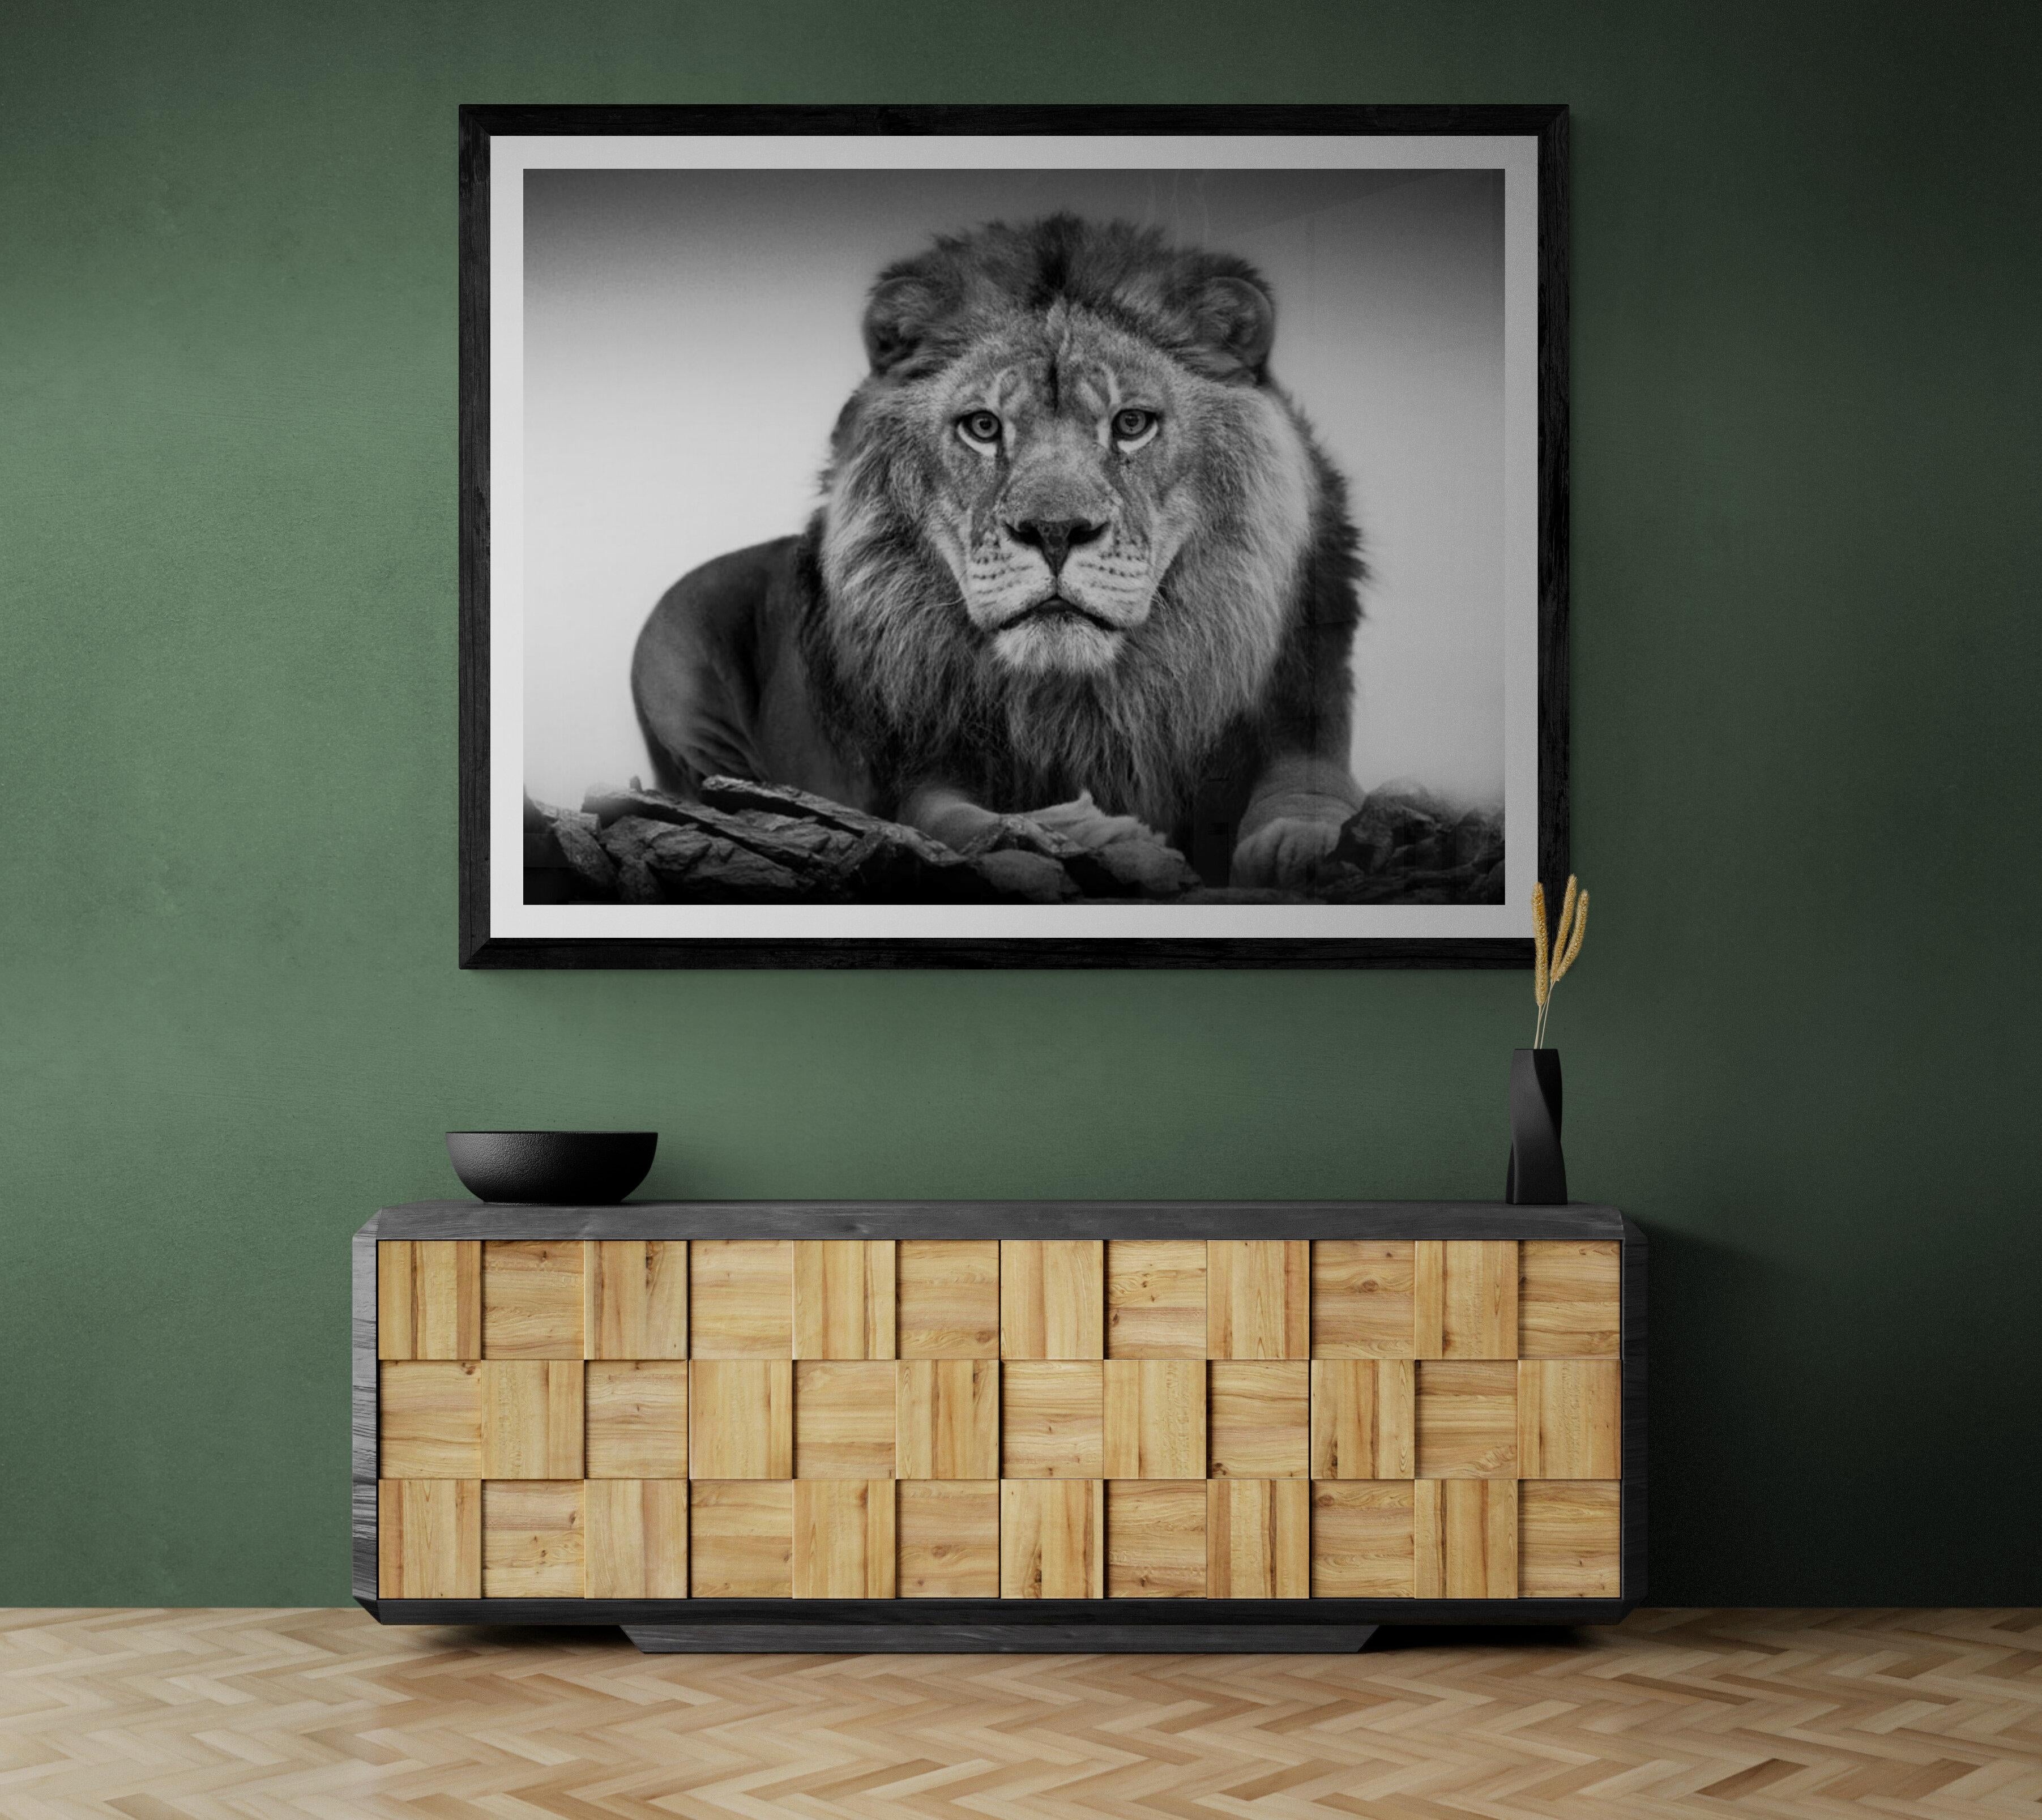 This is a contemporary photograph of an African Lion. 
Unsigned  Print
Archival Pigment print.
Framing available. Inquire for rates. 

FREE SHIPPING

Shane Russeck has built a reputation for capturing America's landscapes, cultures and endangered